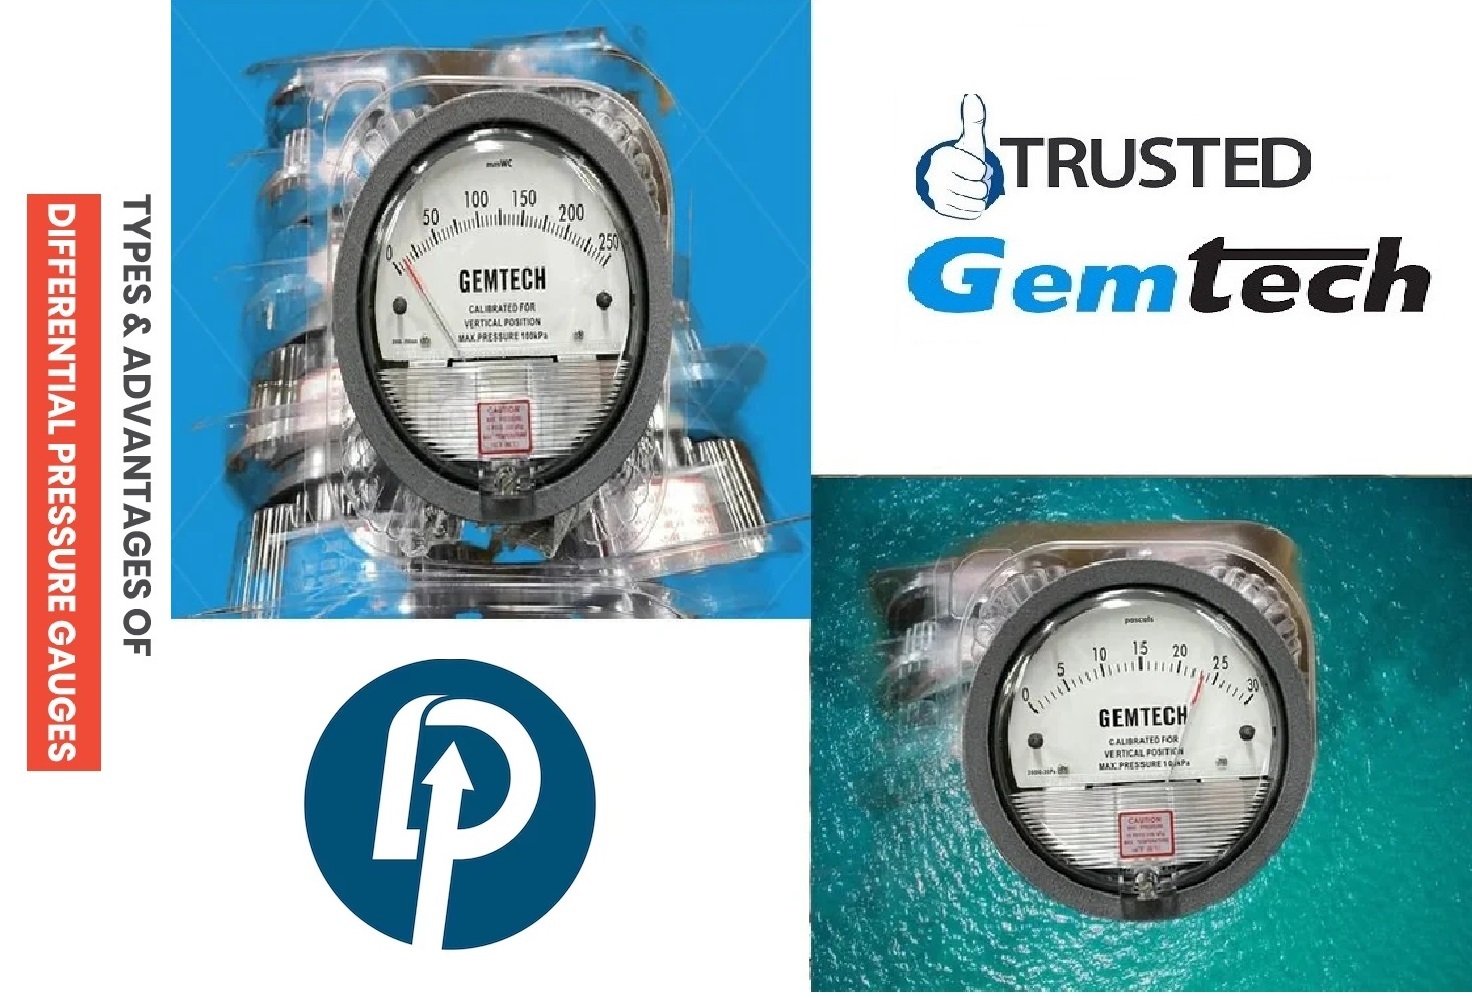 Gemtech Differential pressure Gauges by wholesale Dealers Range 0 to 60 Pascal